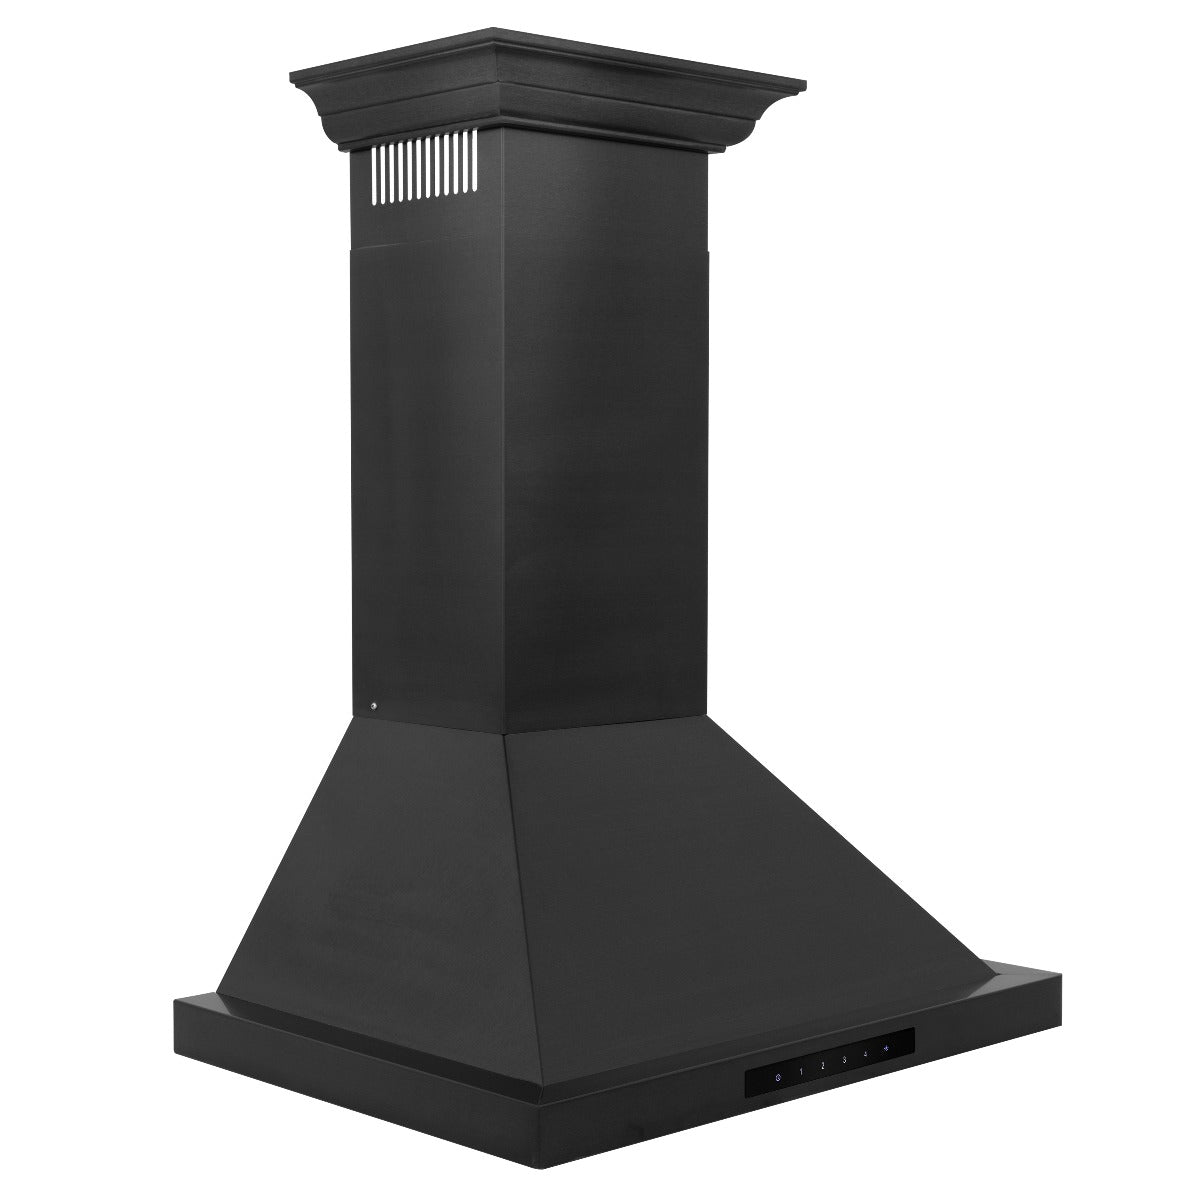 ZLINE 24 in. Convertible Vent Wall Mount Range Hood in Black Stainless Steel with Crown Molding, BSKBNCRN-24